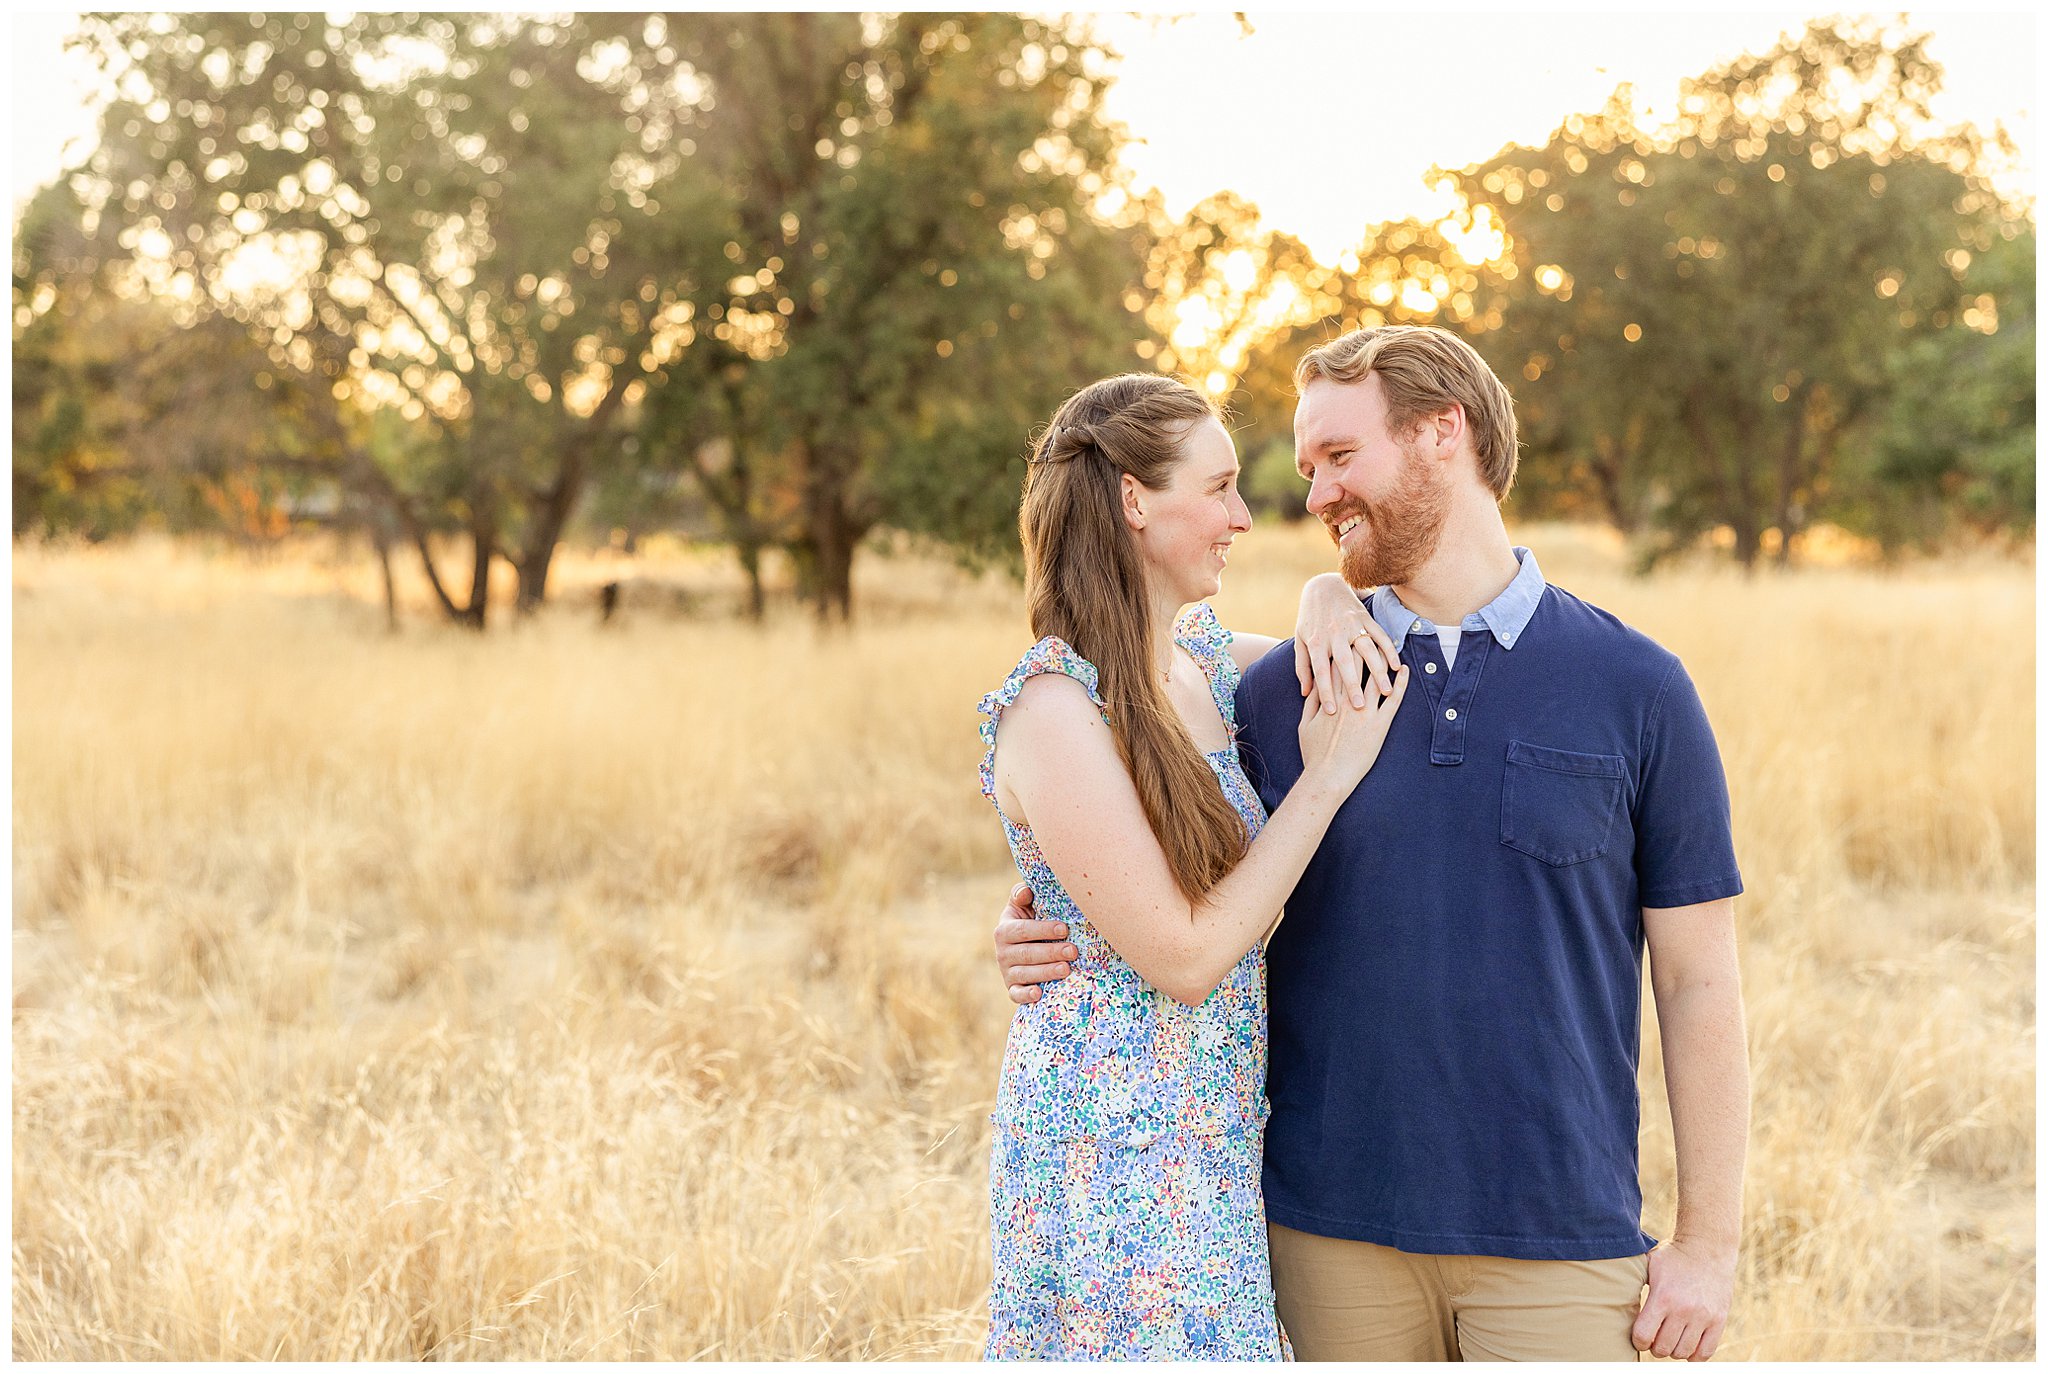 Grass Field Engagement Session Chico CA Cake Valley Oak Trees Summer August,